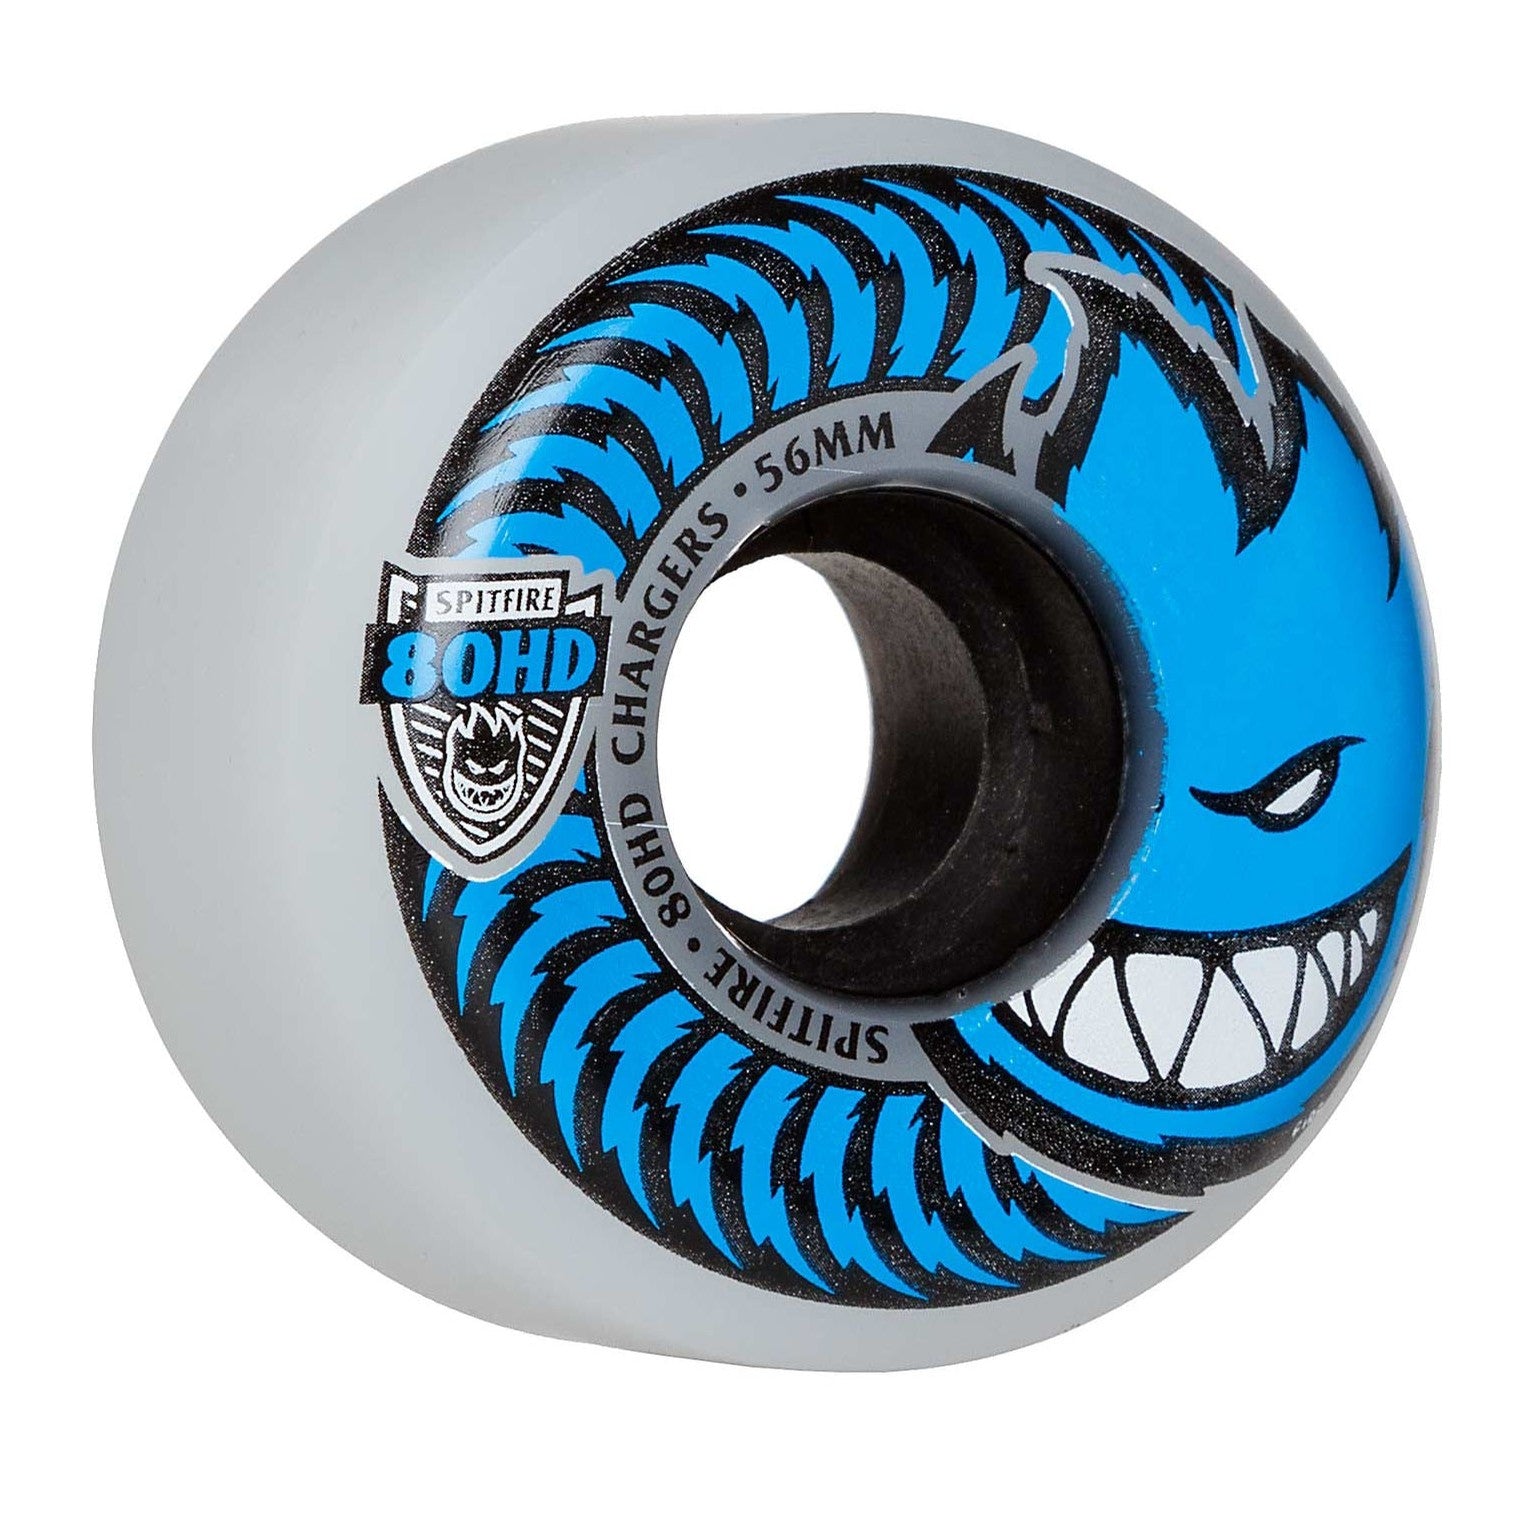 Spitfire Wheels 80HD Charger Conical Clear 56mm